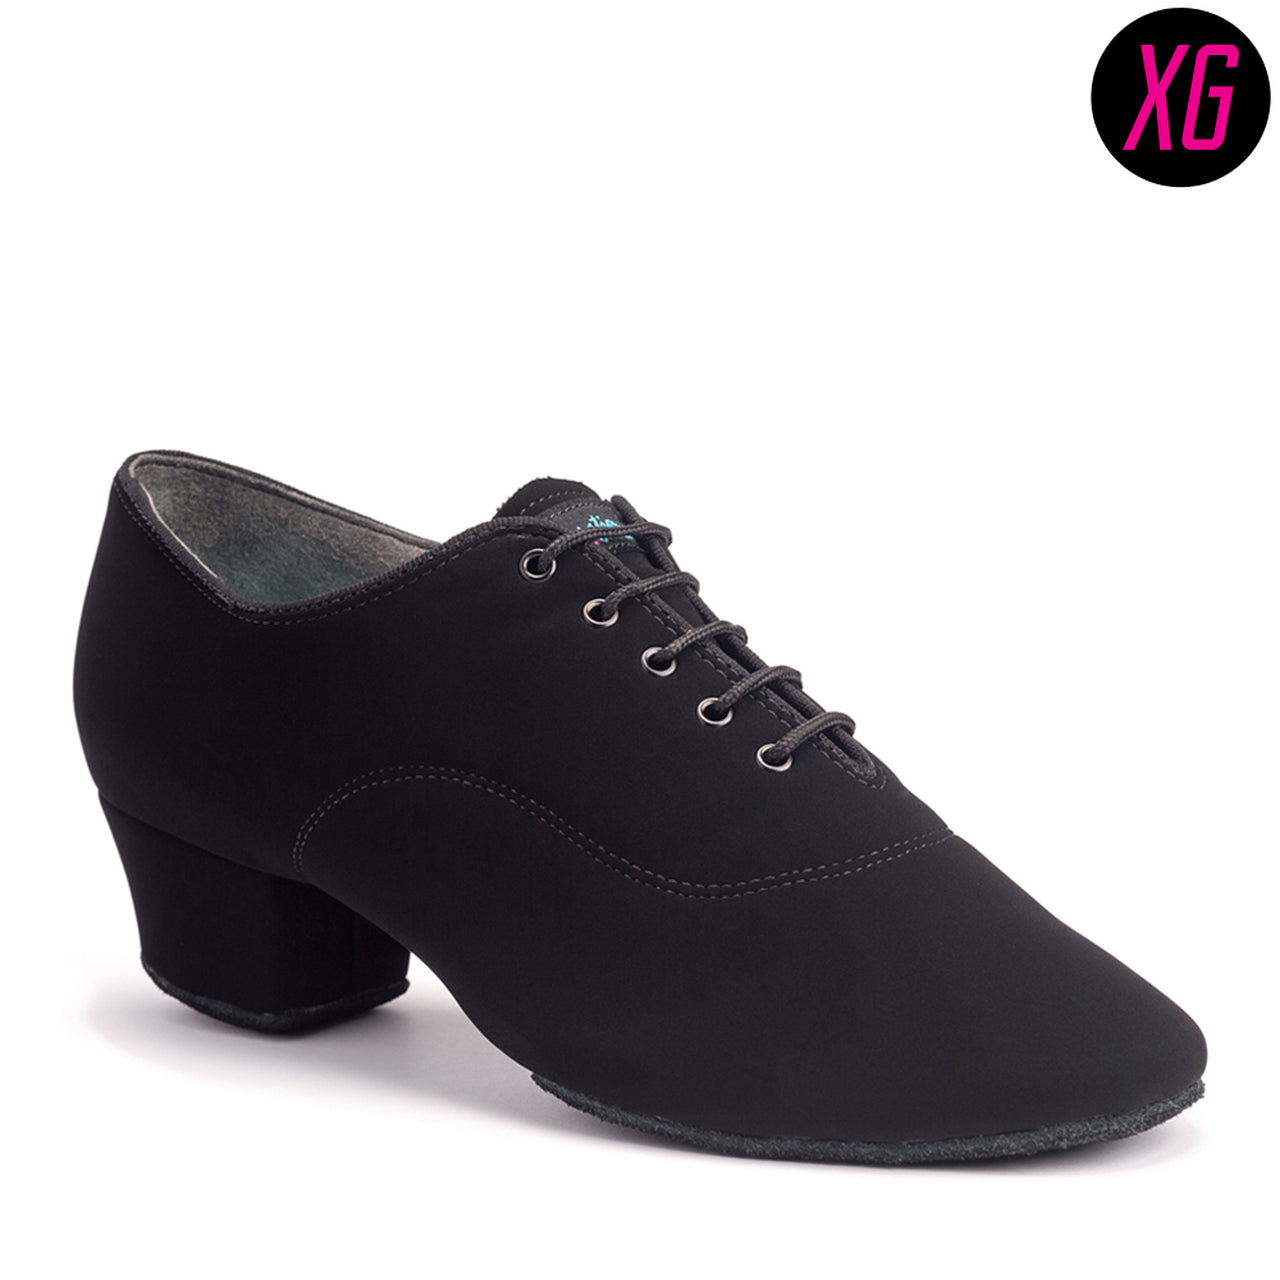 International Dance Shoes IDS Rumba XG Men's Latin Shoe with Enhanced Sole Grip Available in Black Calf or Black Nubuck